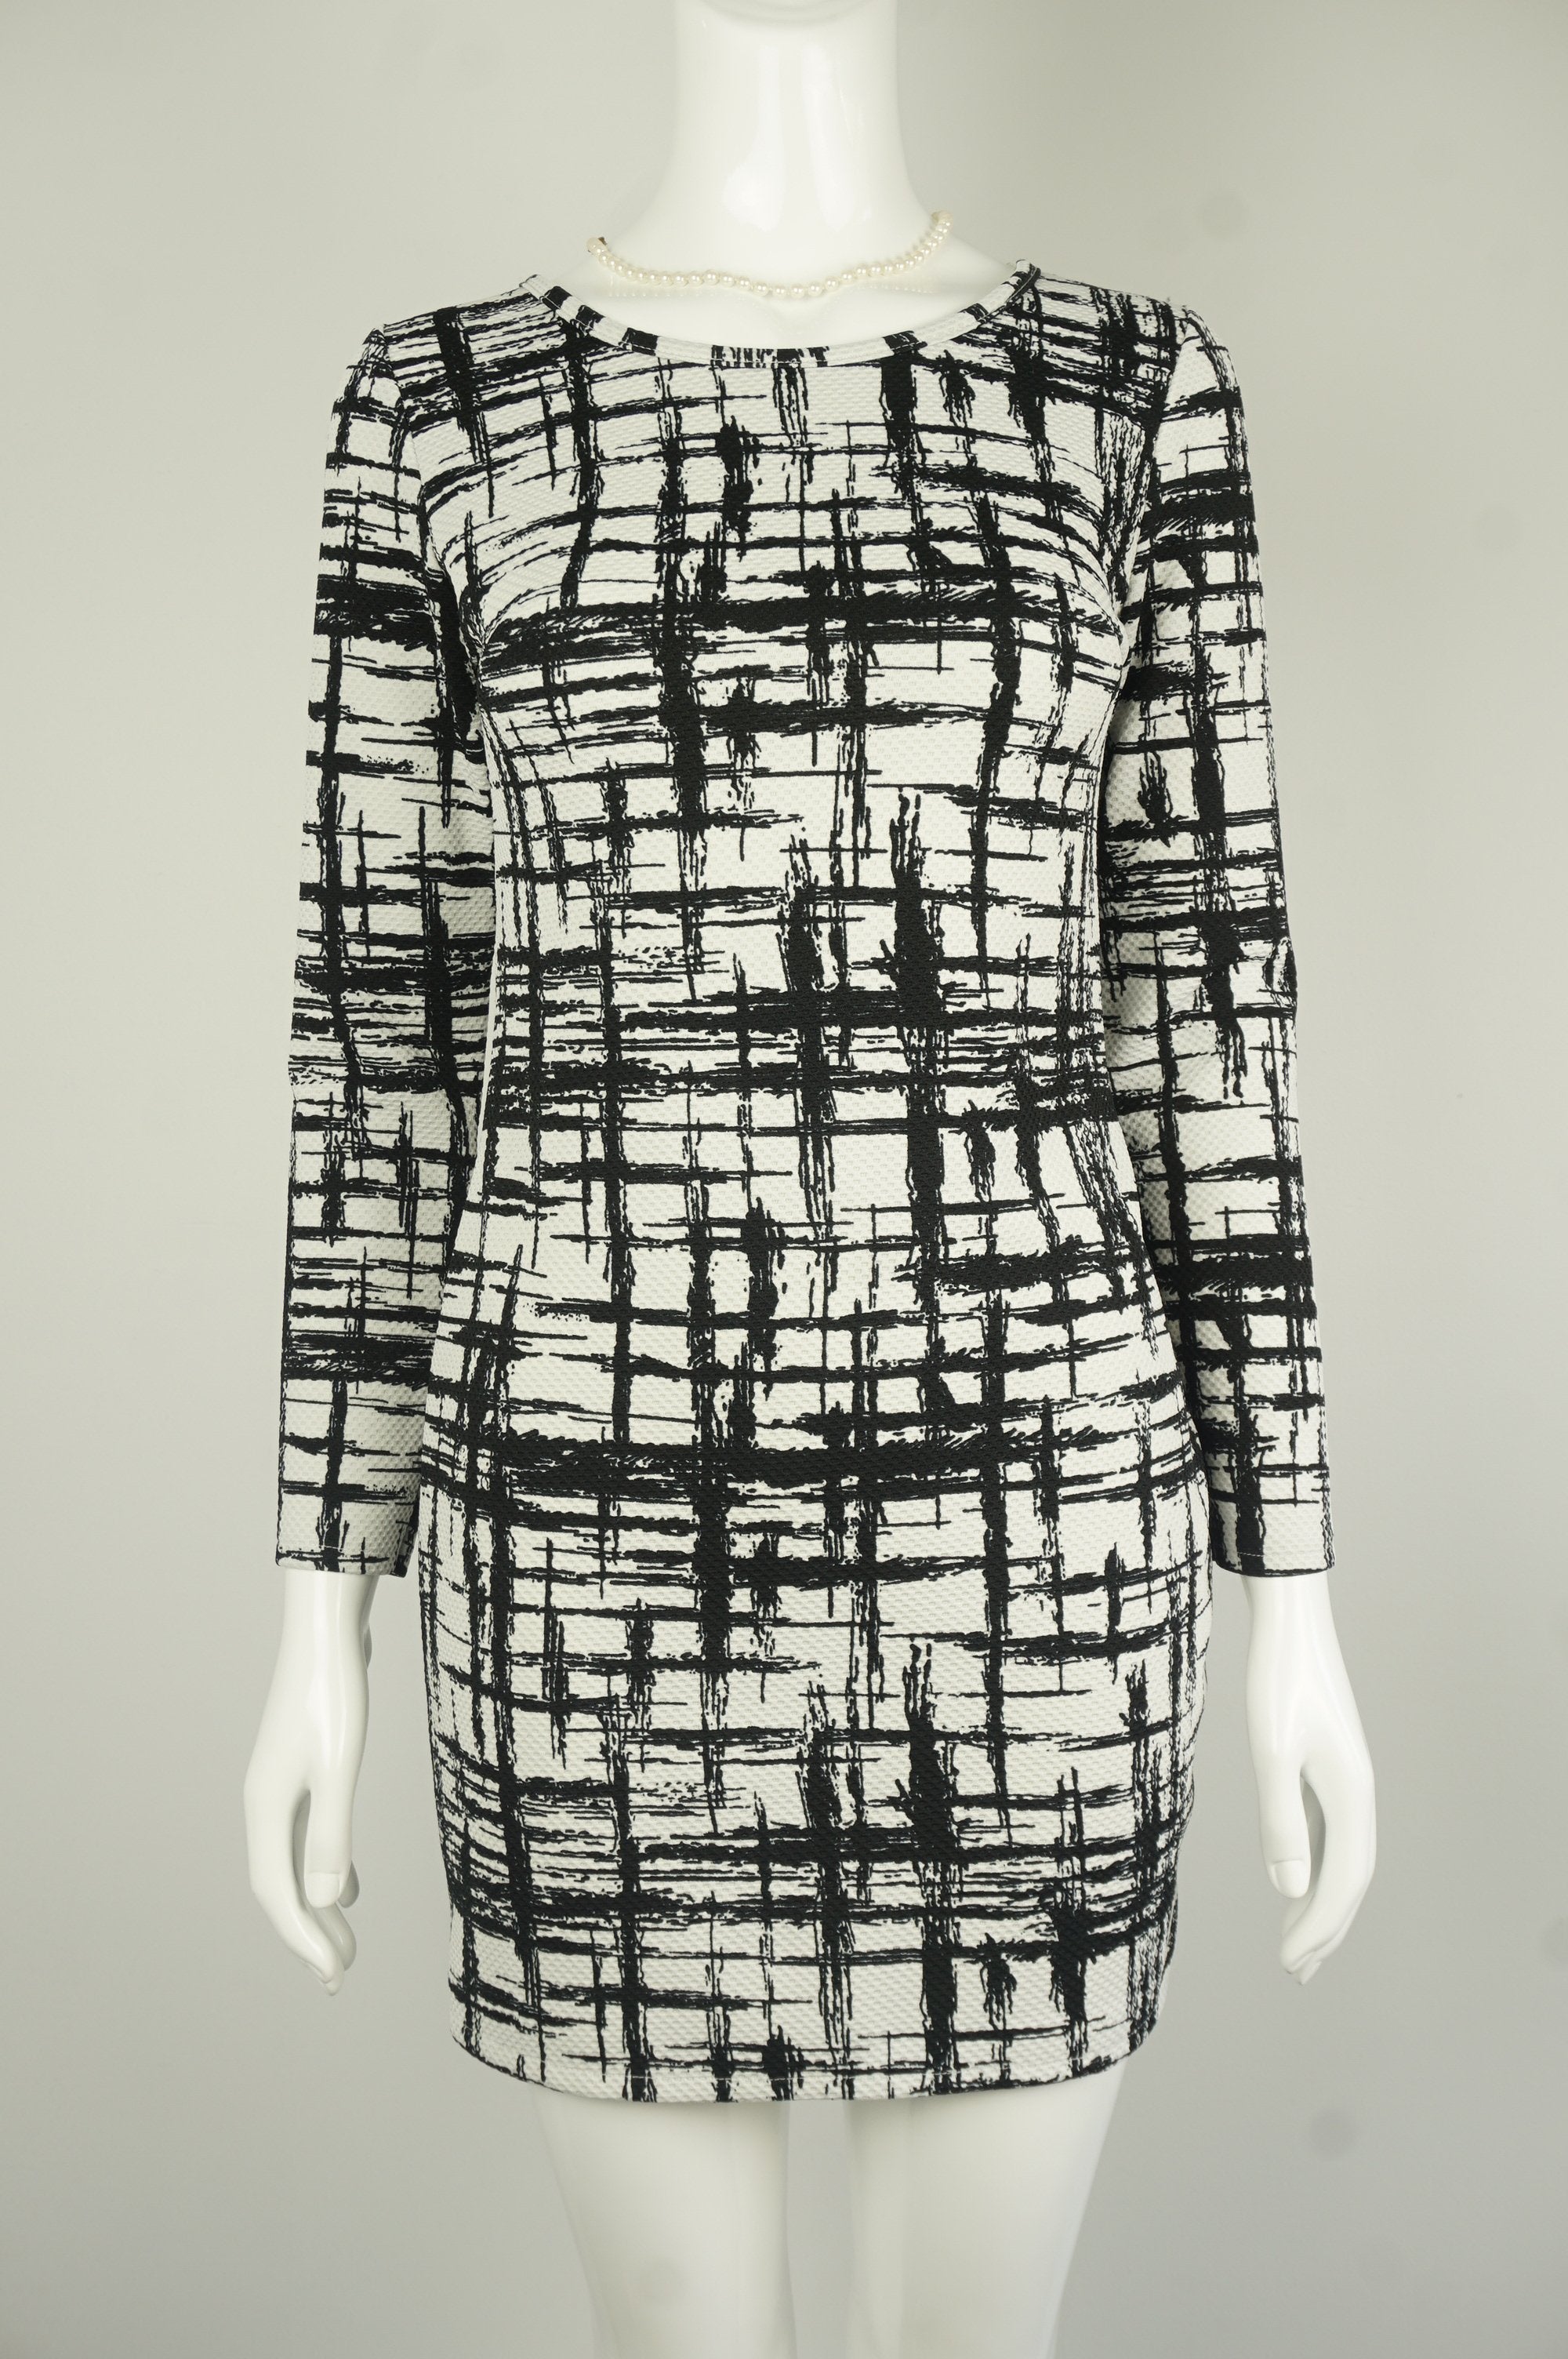 Elli Share Black and White Long Sleeves Professional Dress, This black and white professional dress expresses your confident self and impeccable fashion taste. , Black, White, 100% Combined Cotton , women's Dresses & Rompers, women's Black, White Dresses & Rompers, Elli Share women's Dresses & Rompers, Professional black and white women's dress, Checked Pattern black and white Work Dress, Checked Print black and white Work Dress, Business Casual black and white Women's dress